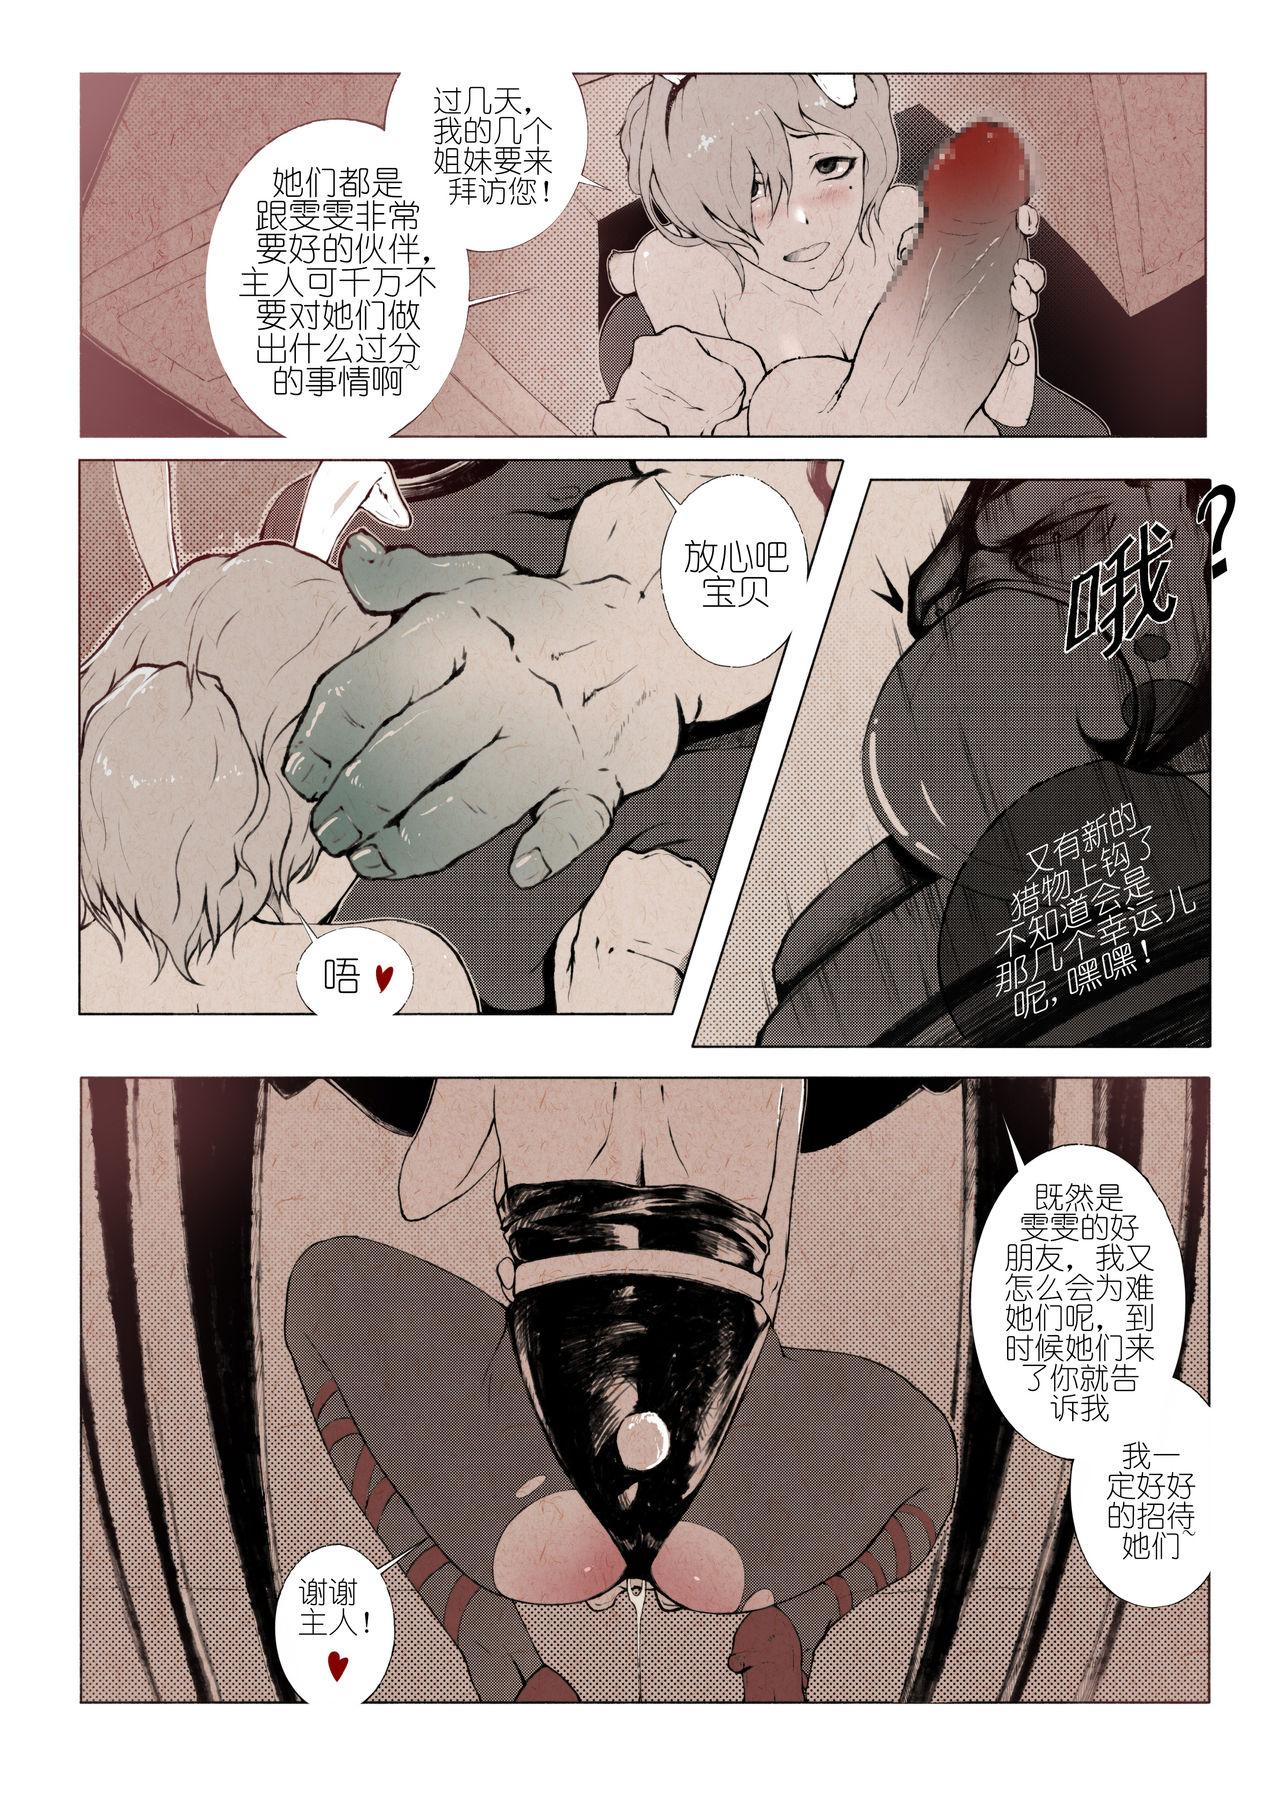 Amazing R18厄加特酒馆（中篇） - League of legends Toes - Page 2